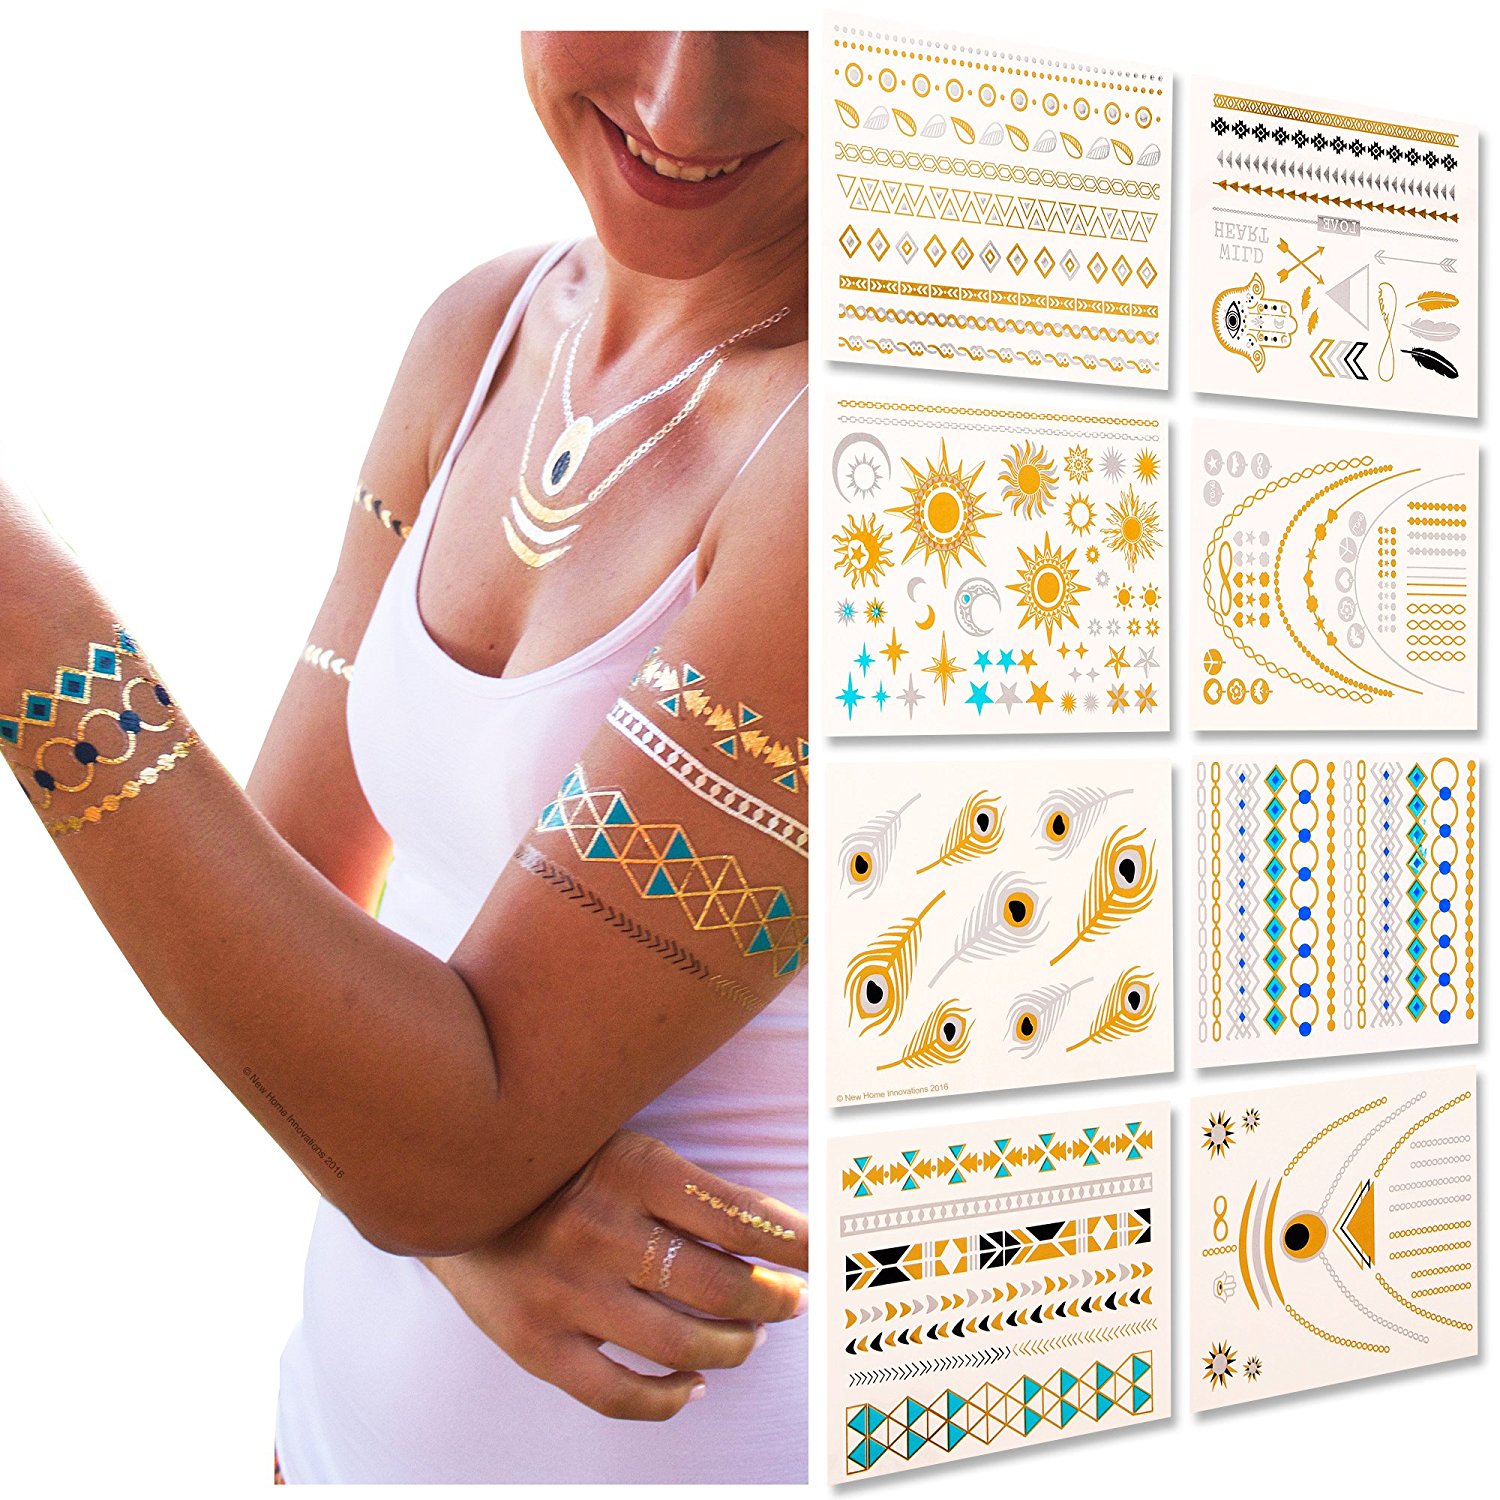 gift-ideas-for-teens-and-preteens-gold-metallic-tattoos